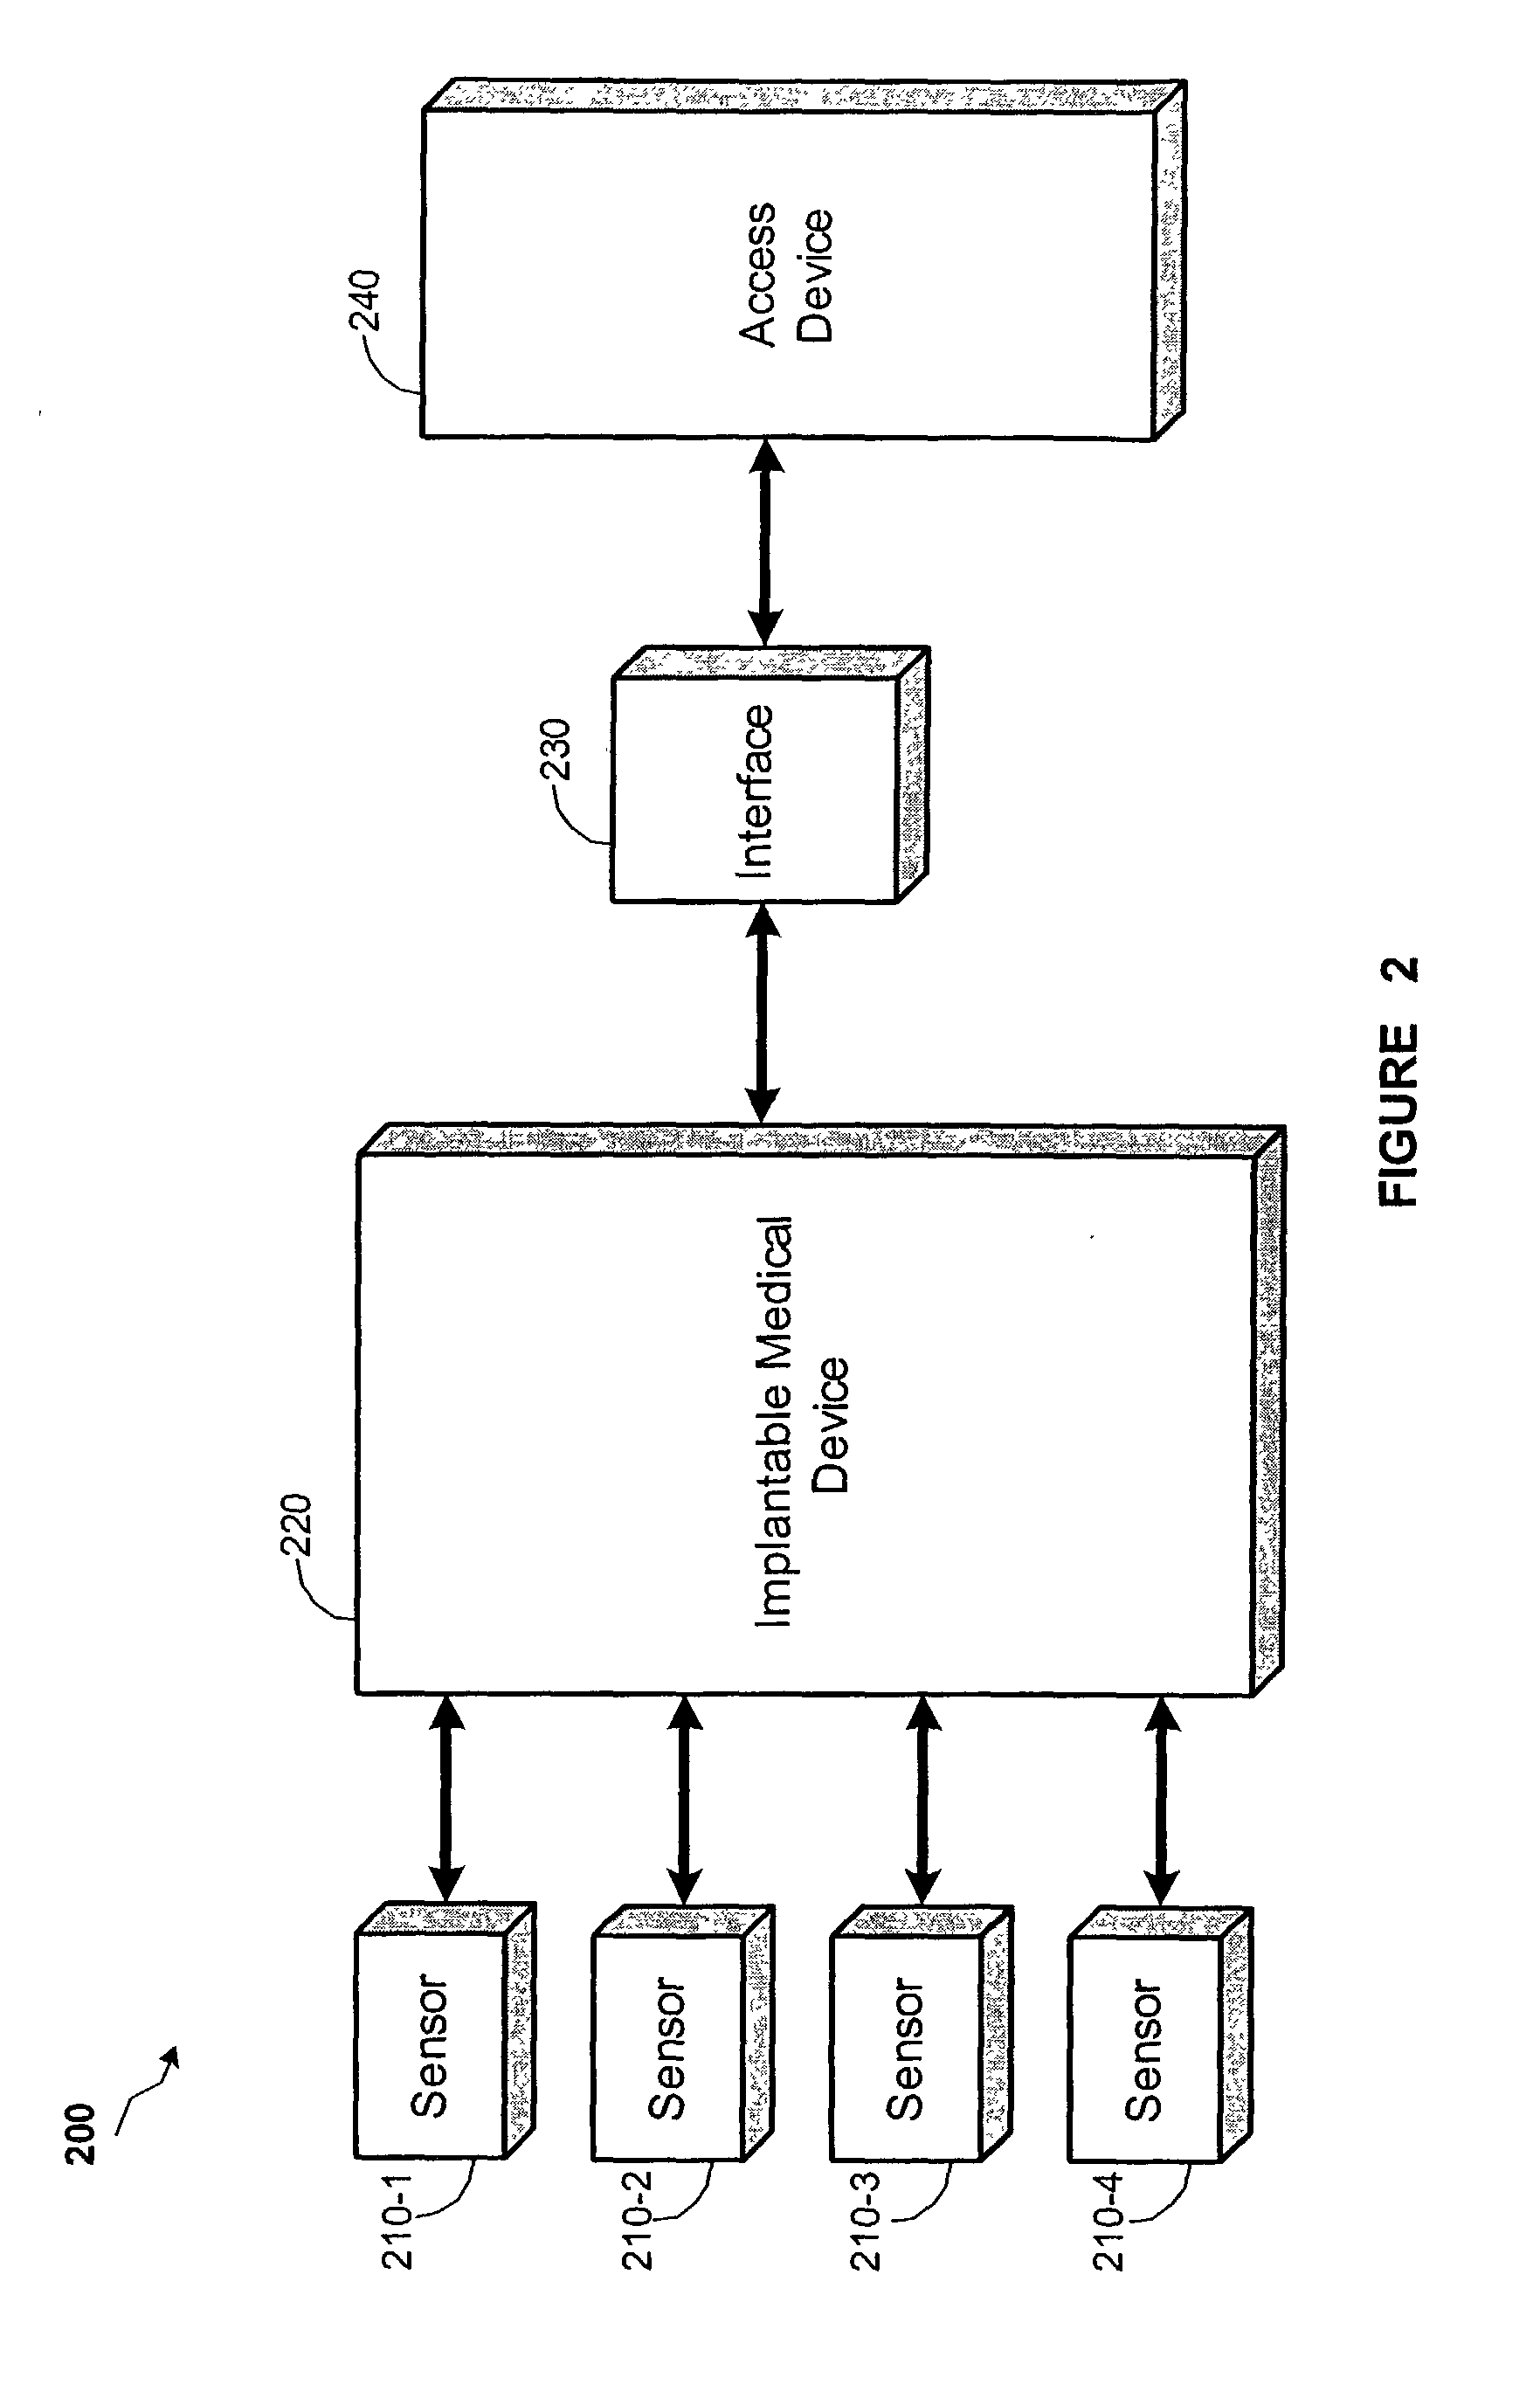 Method and apparatus to detect and monitor the frequency of obstructive sleep apnea